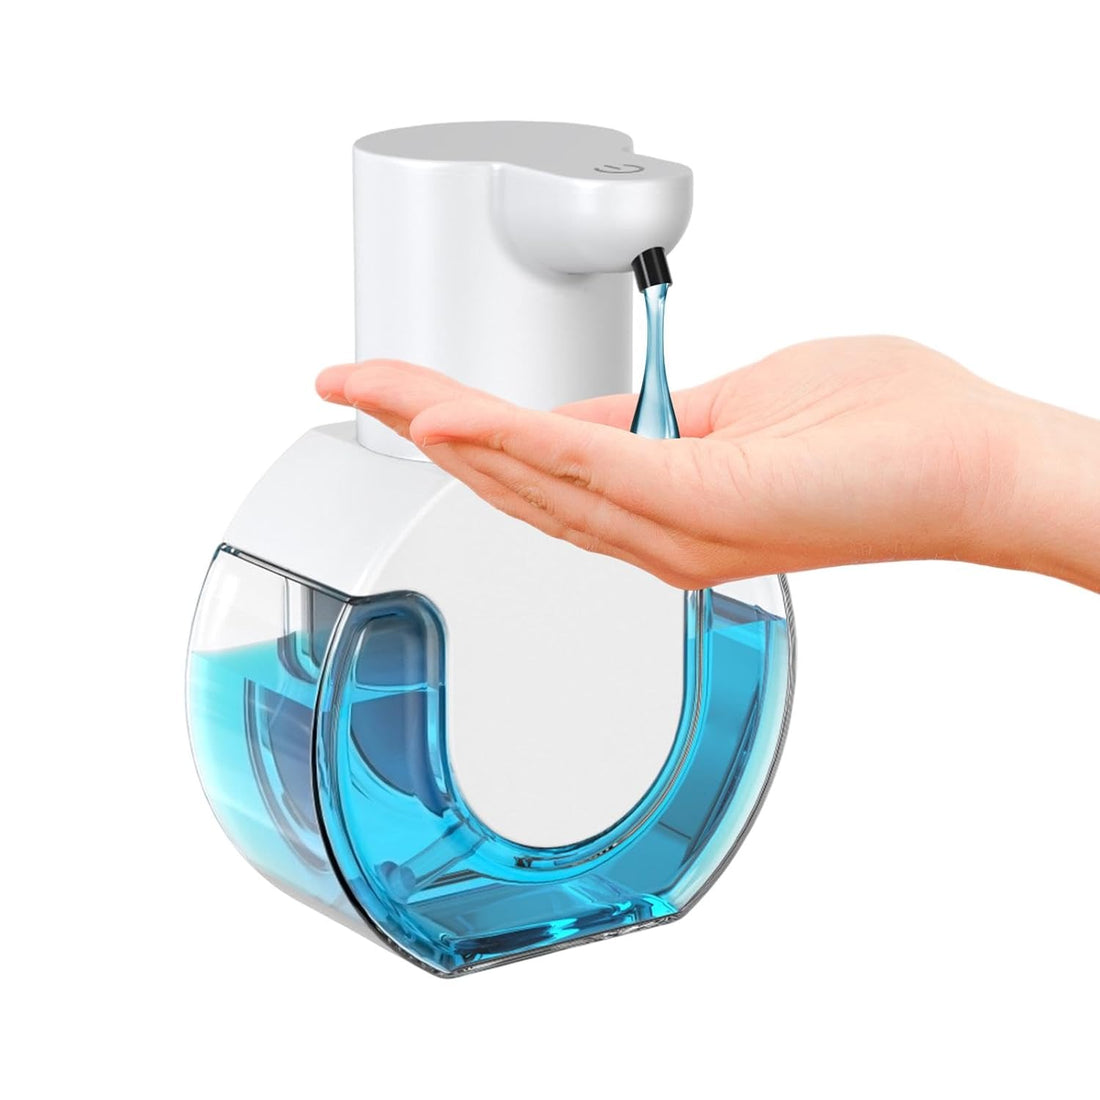 Automatic Liquid Soap Dispenser Touchless Hand Soap Dispenser with Adjustable Soap Dispensing Volume Wall Mounted Automatic Hand Soap for Bathroom Countertop, Kitchen(Size:430ml - Gel discharged)